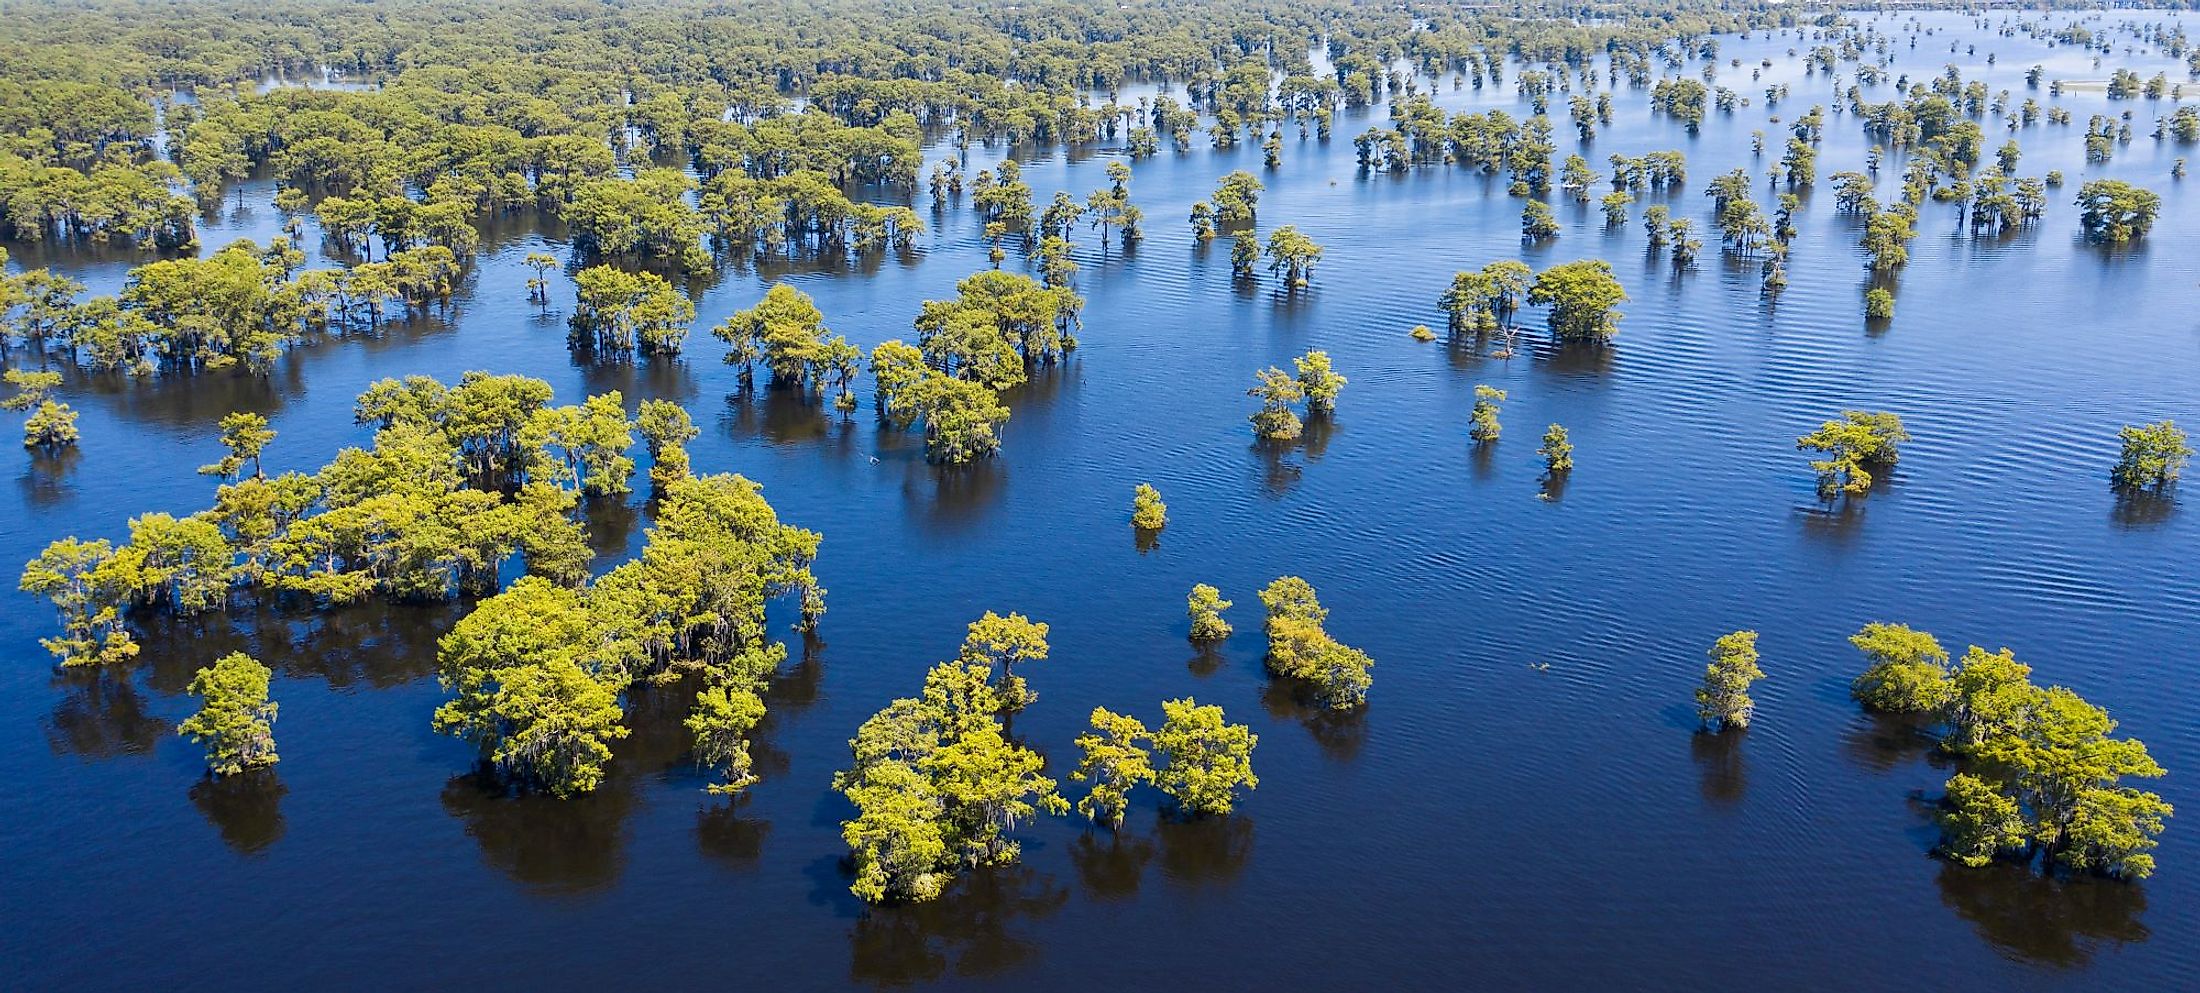 Aerial view of the majestic Atchafalaya River and Swamp in Louisiana. 